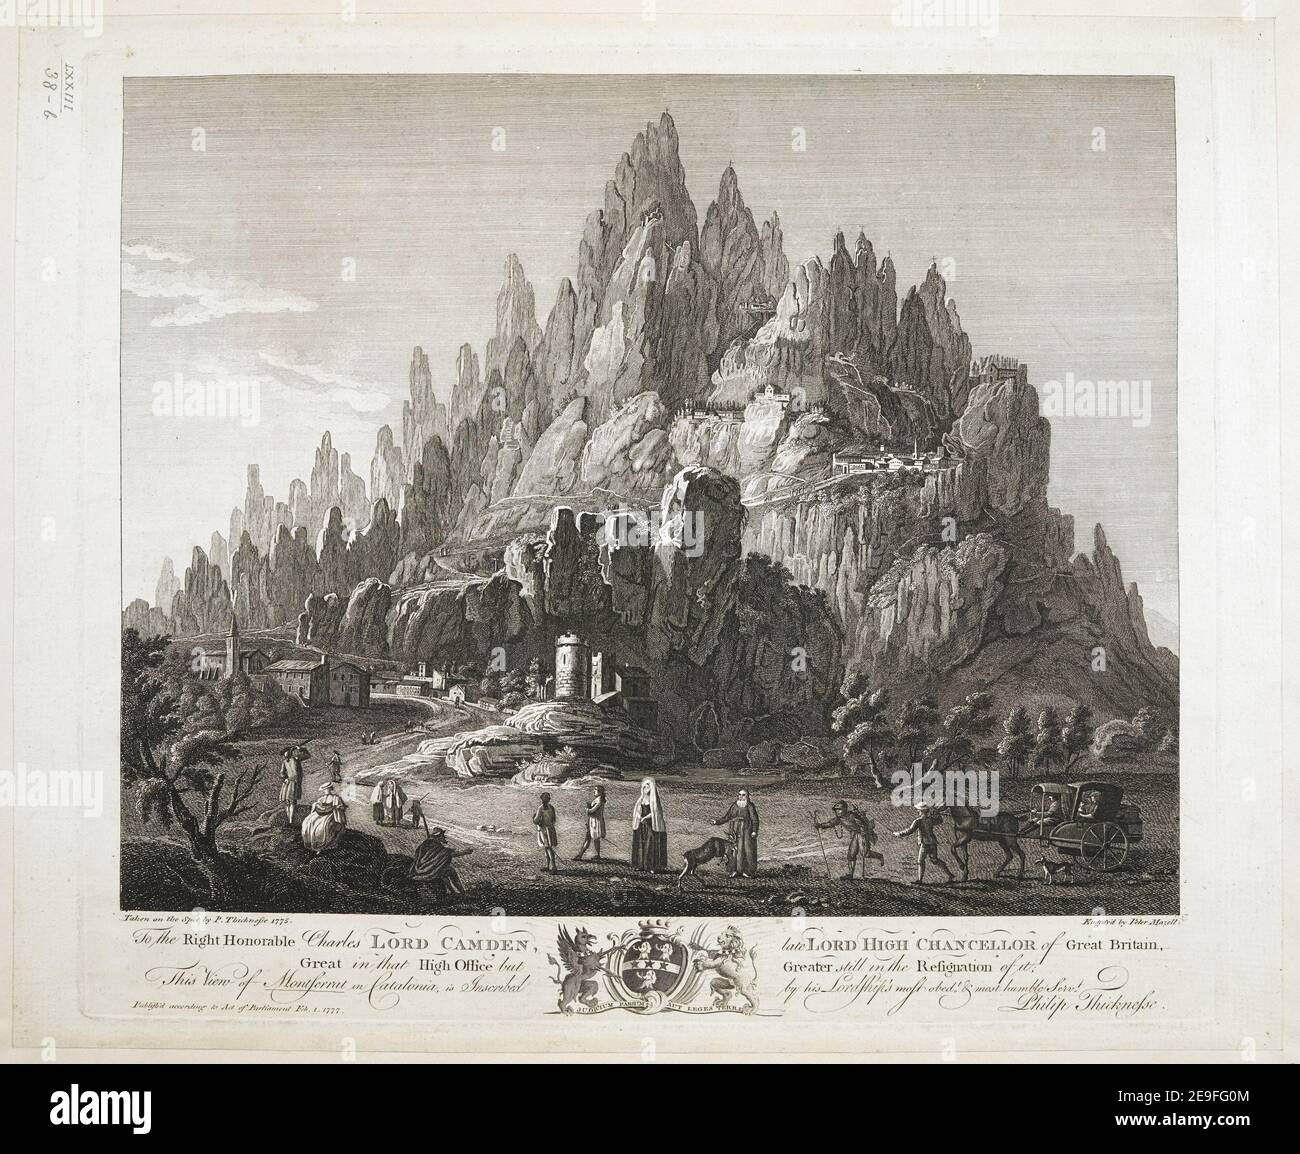 View of Montserrat   Author  Mazell, Peter 73.38.b. Place of publication: [London] Publisher: [publisher not identified] Date of publication: Publish'd according to Act of Parliament Feb.1.177  Item type: 1 print Medium: etching and engraving Dimensions: platemark 34.2 x 40.2 cm, on sheet 36.8 x 45.1 cm  Former owner: George III, King of Great Britain, 1738-1820 Stock Photo